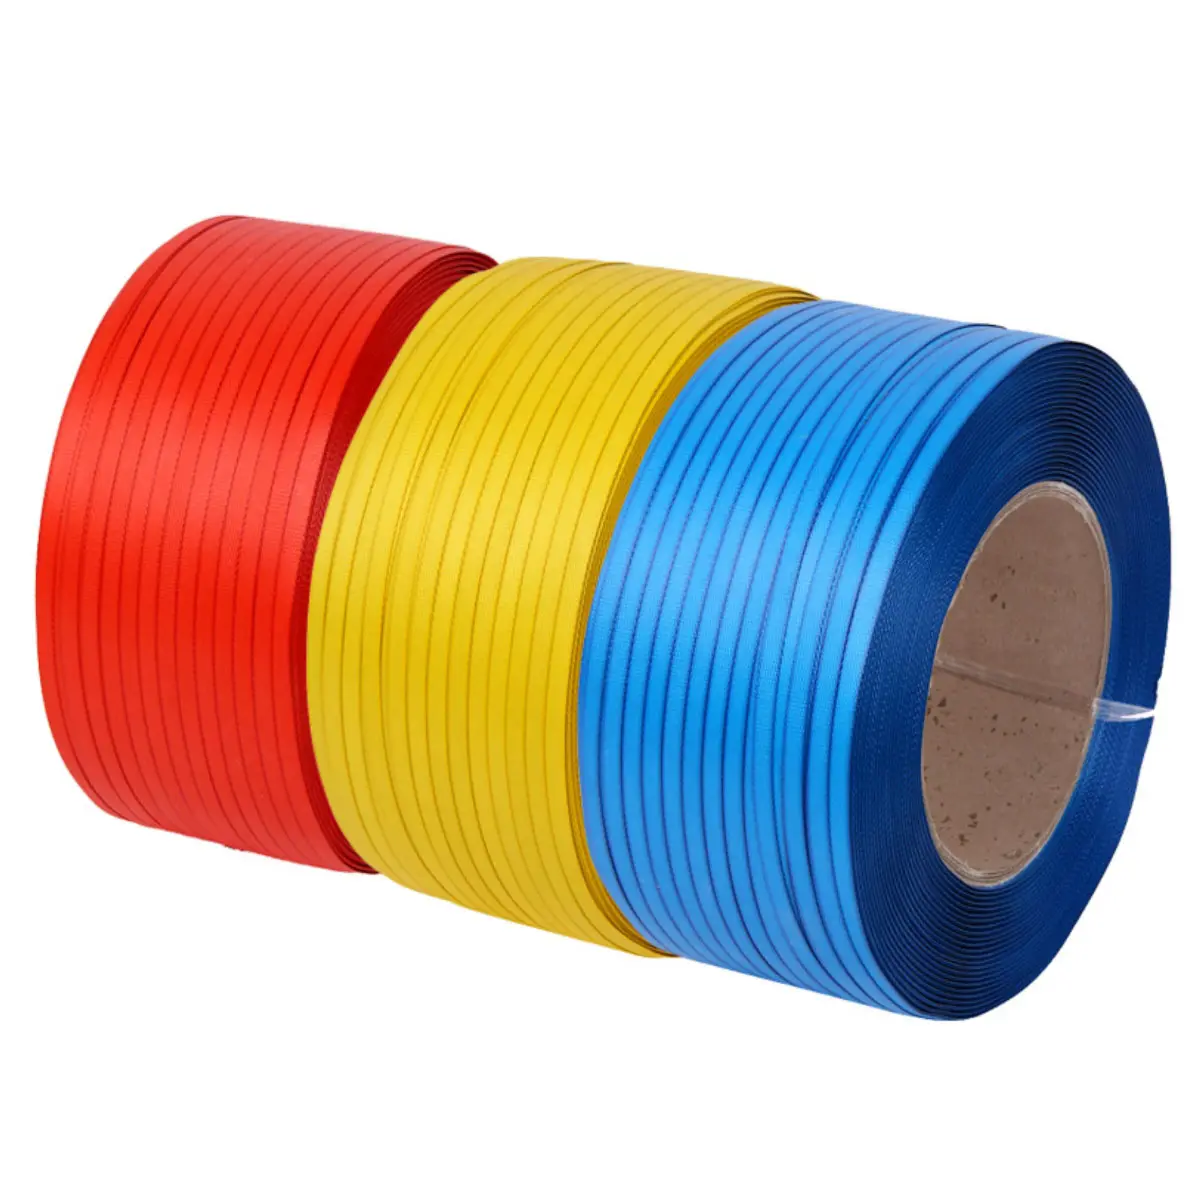 Good Quality PP/PET 15 mm Band Strapping PP Strapping Band Roll Polypropylene Straps